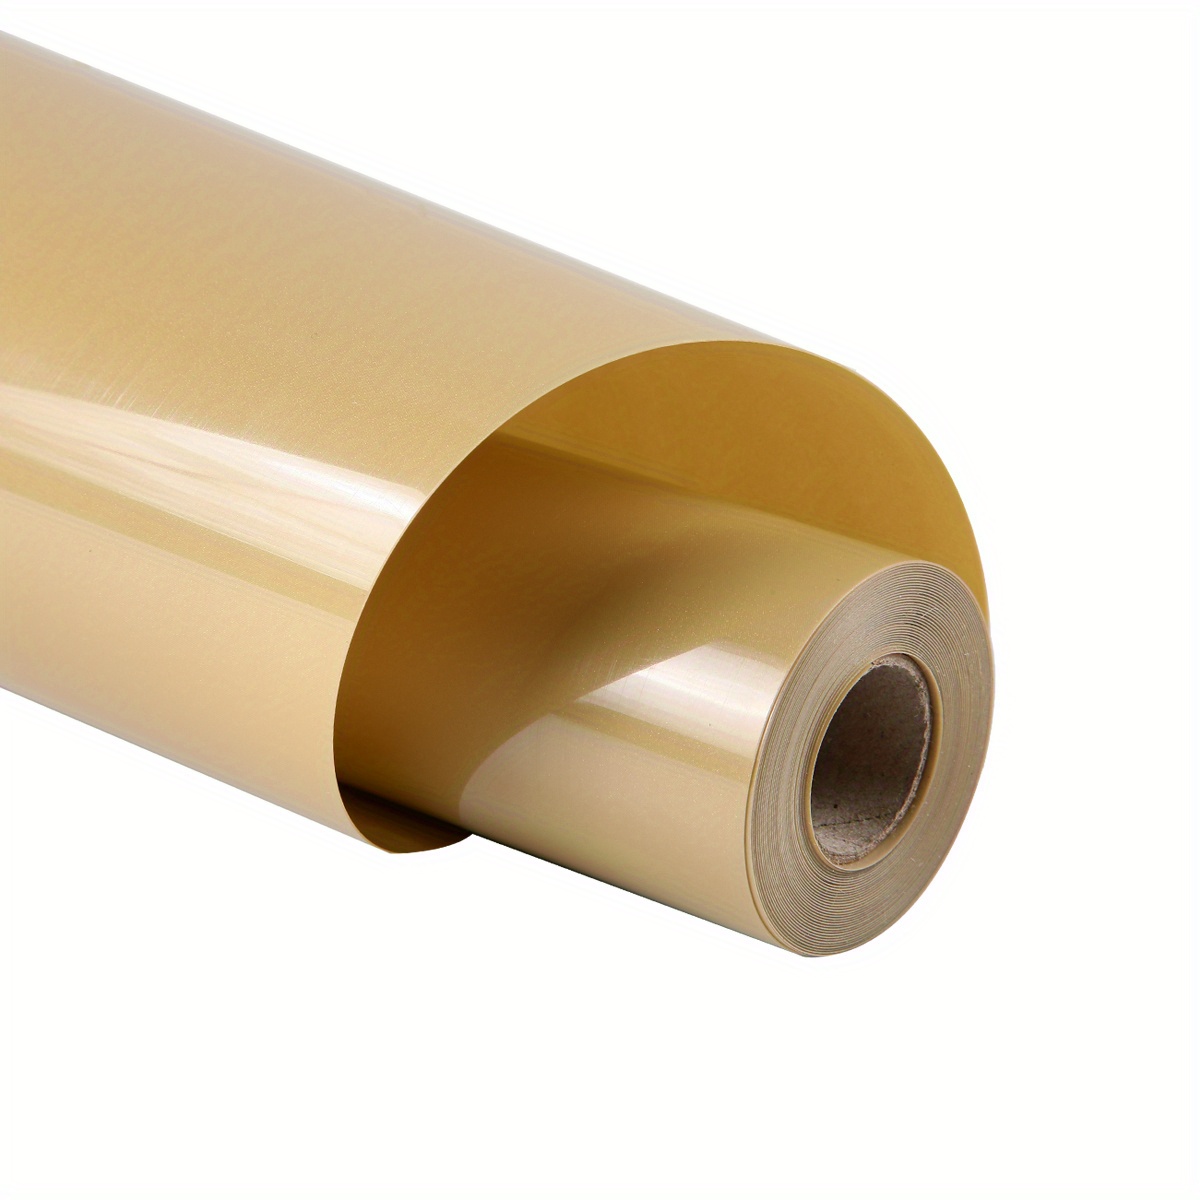 Gold Heat Transfer Vinyl Roll, 12 x 8' Gold HTV Vinyl, Glossy Adhesive  Gold Iron on Vinyl - Easy to Weed & Cut Vinyl HTV for T-Shirt (Gold, 12  inch x